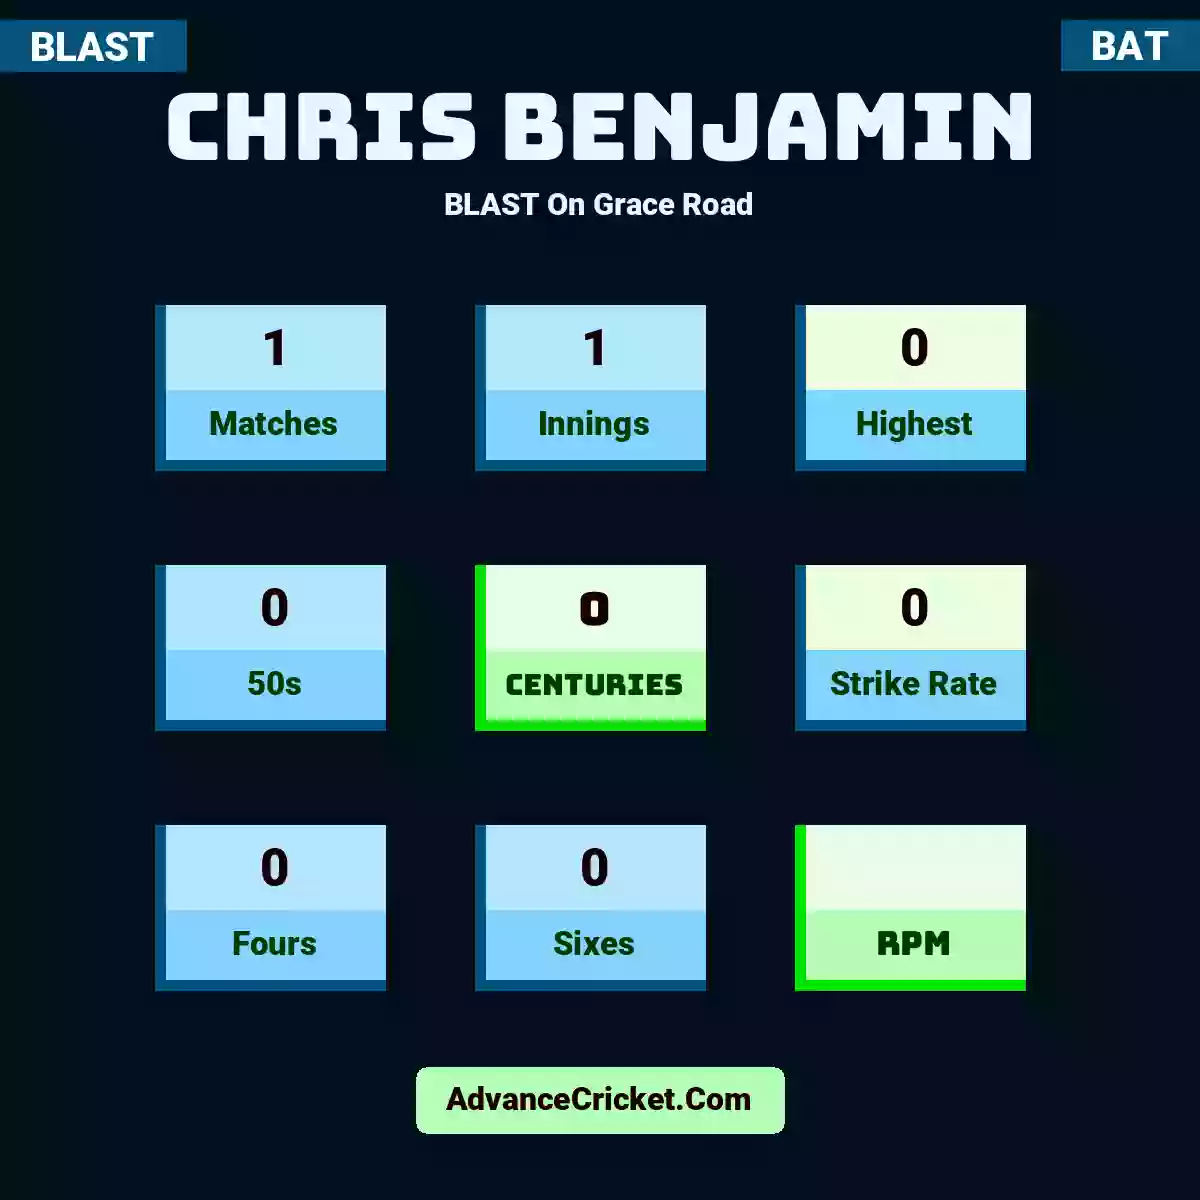 Chris Benjamin BLAST  On Grace Road, Chris Benjamin played 1 matches, scored 0 runs as highest, 0 half-centuries, and 0 centuries, with a strike rate of 0. C.Benjamin hit 0 fours and 0 sixes.